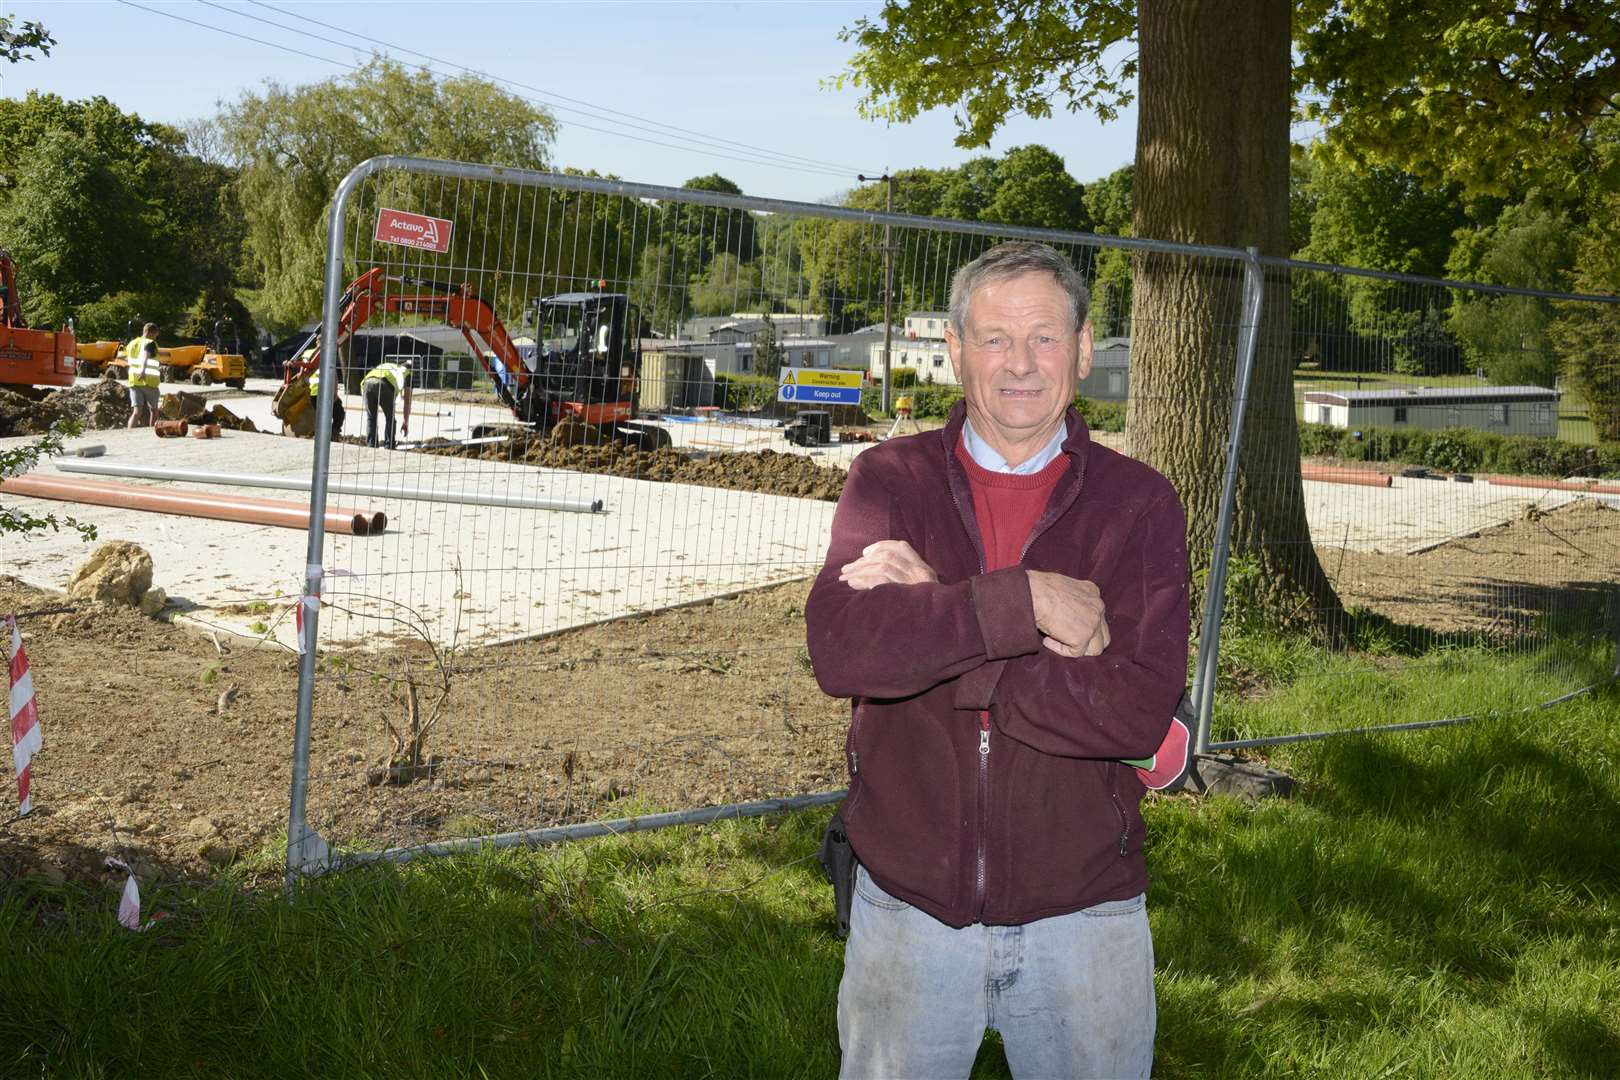 Kent Turkeys owner Tony Fleck is pictured at the site where the hedge was removed